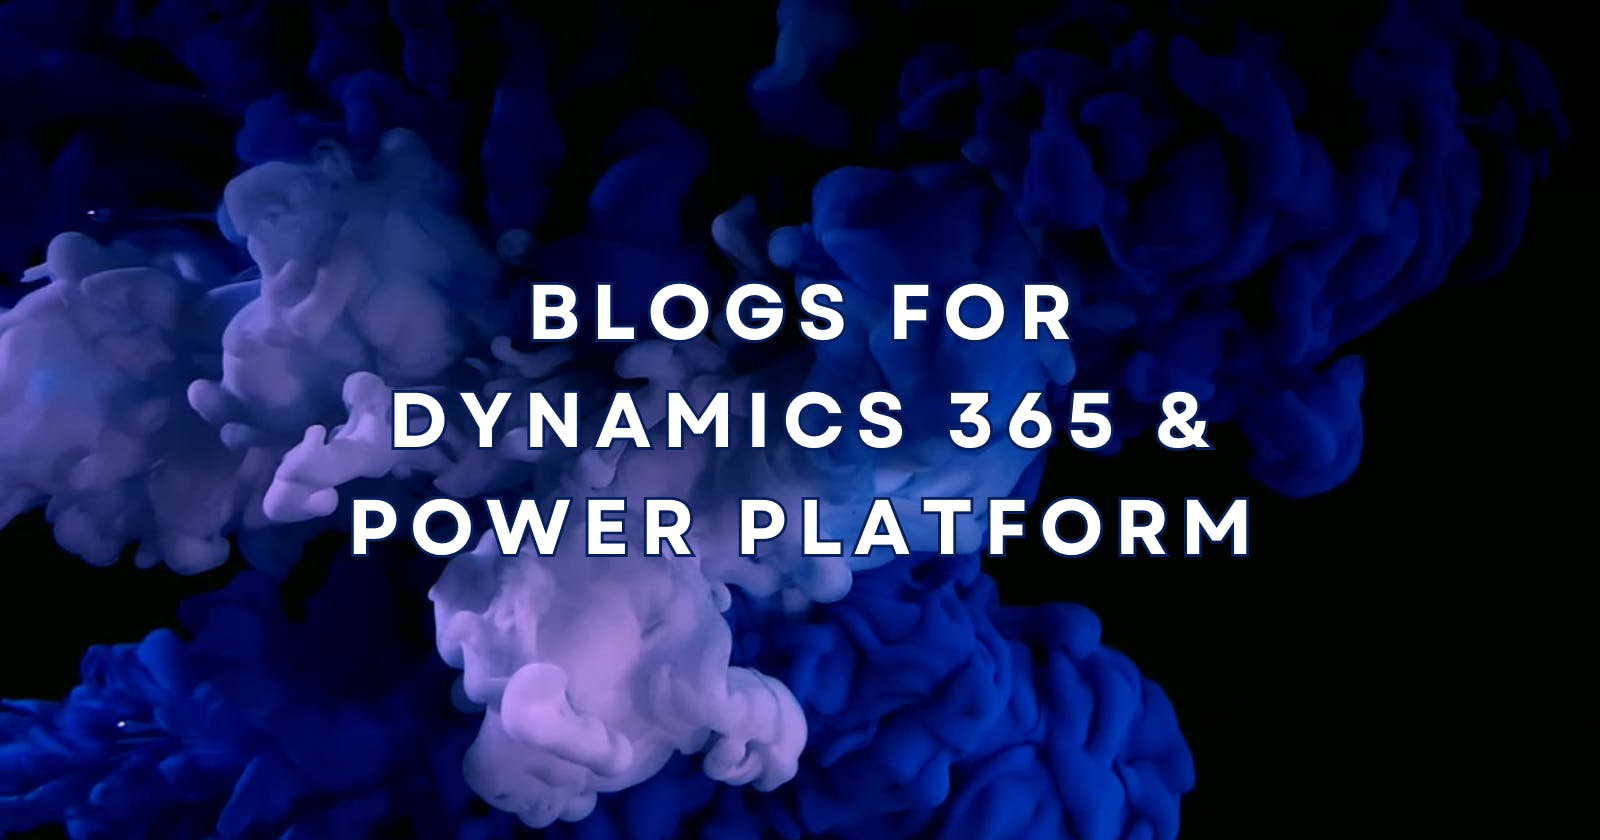 My Favourite Blogs for Dynamics 365 and Power Platform